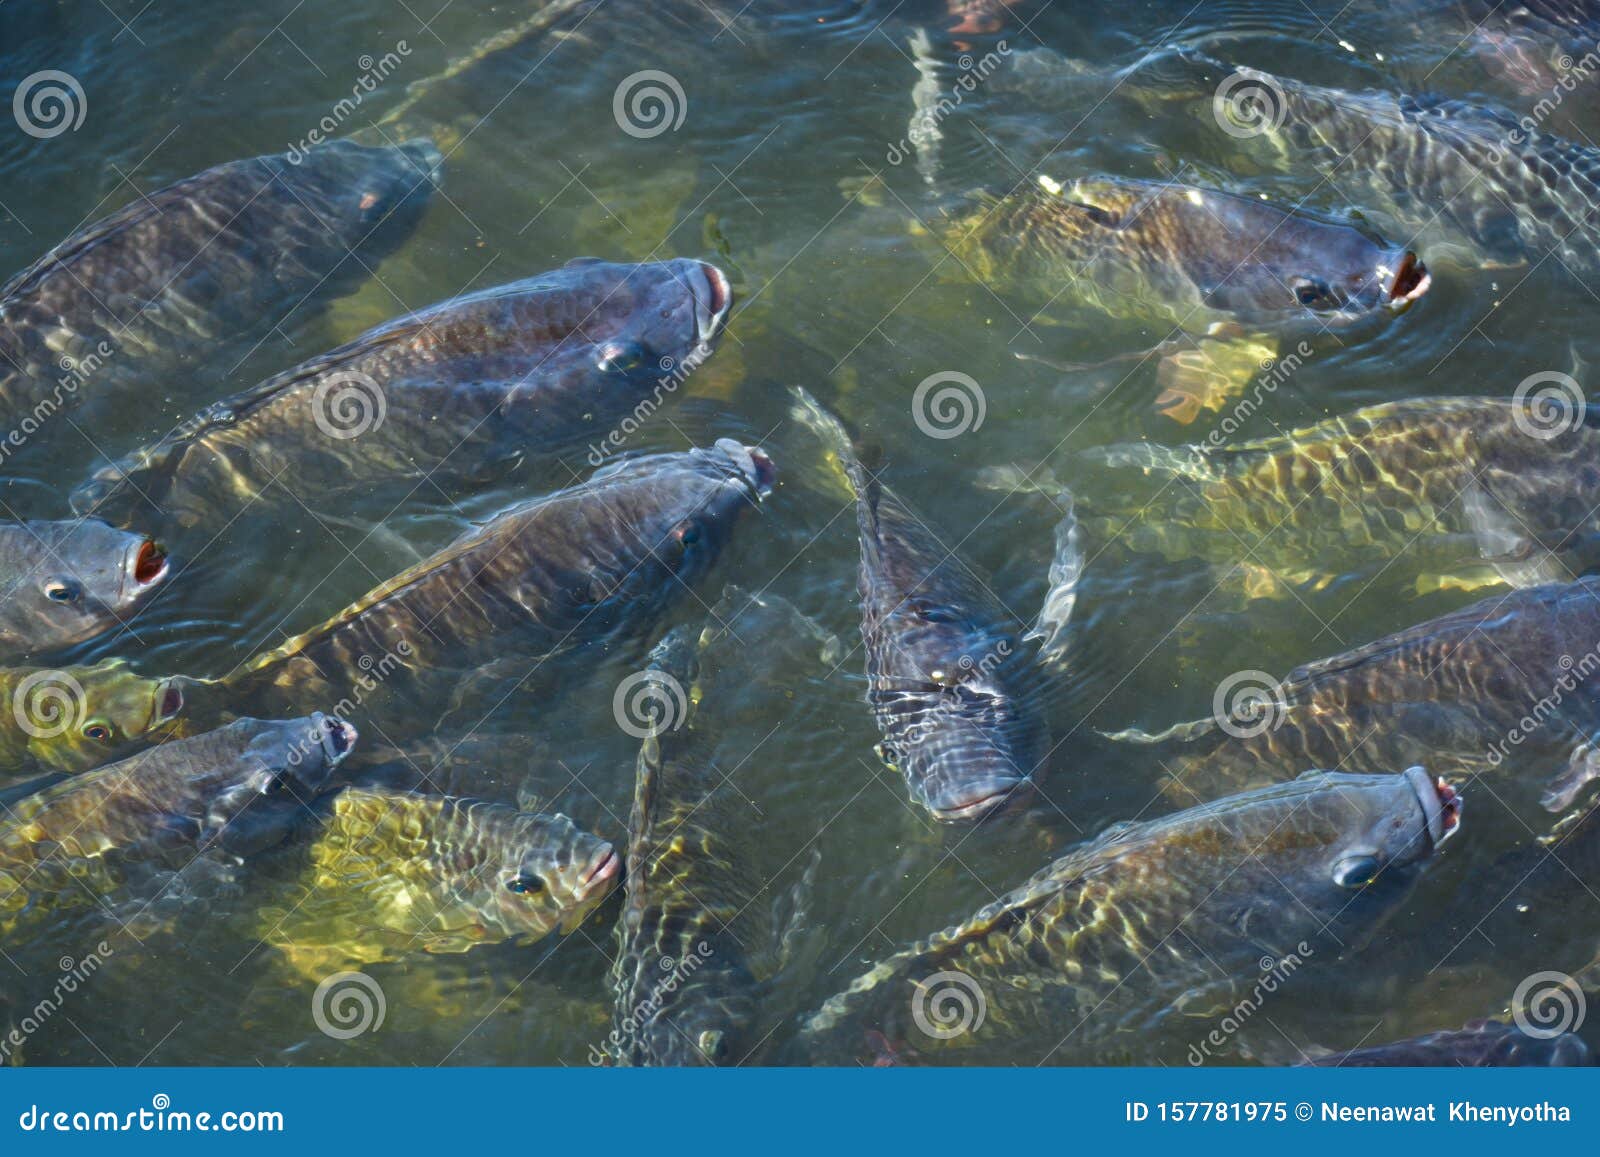 Tilapia in the Pond is Waiting for Feeding. Stock Image - Image of fresh,  commercial: 157781975